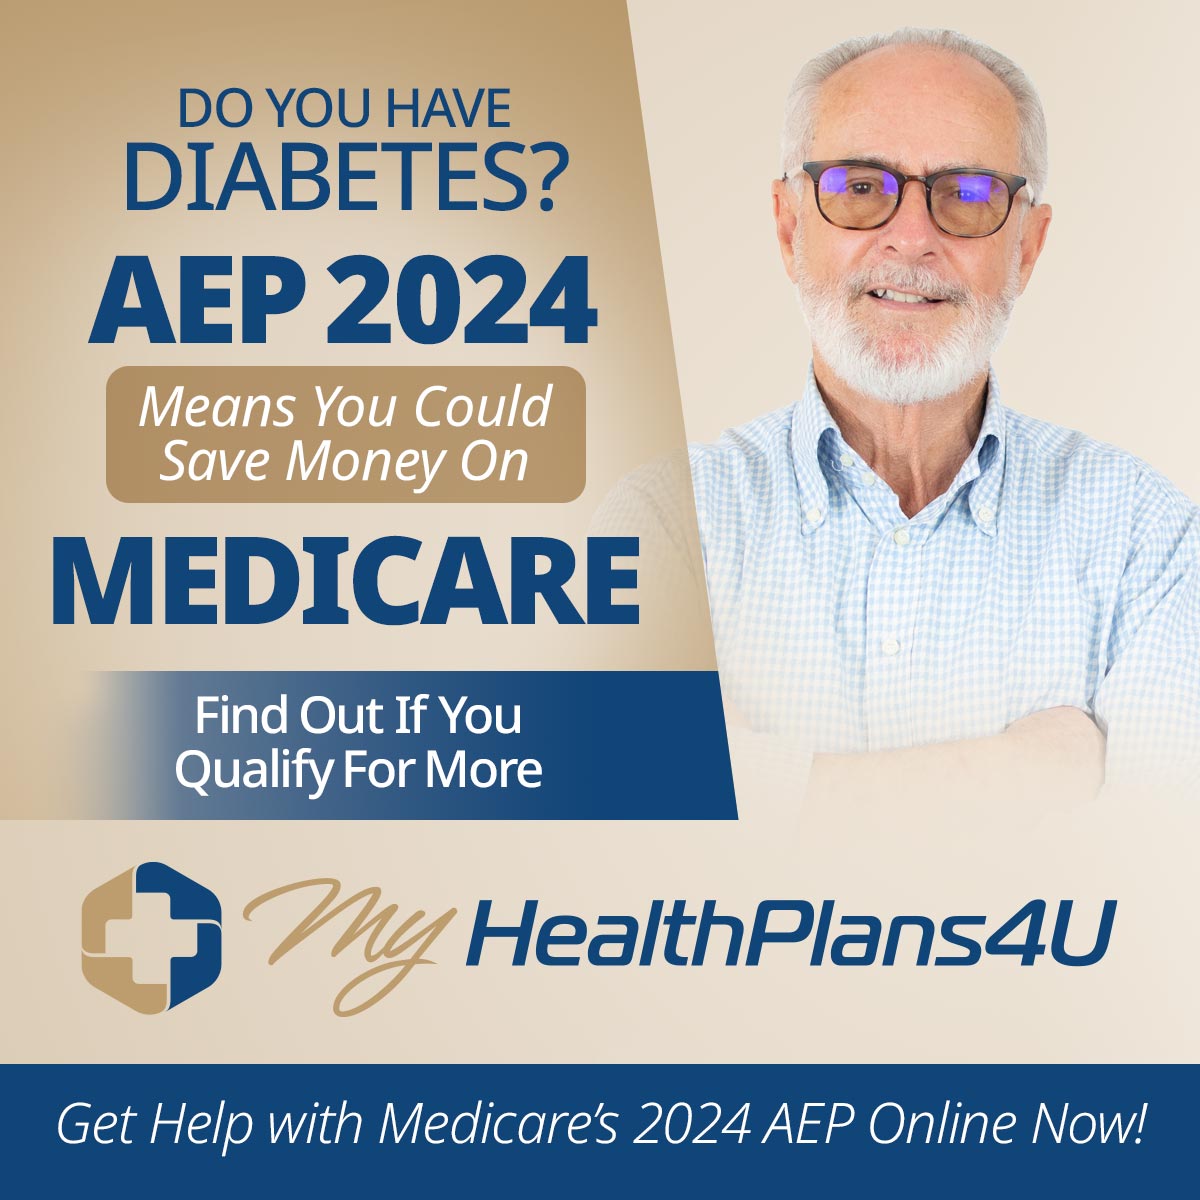 Do you have diabetes? AEP 2024 means you could save money on Medicare. Find out if you qualify for more. My Medicare Plans 4 U. Get Help's with Medicare's 2024 AEP online now!